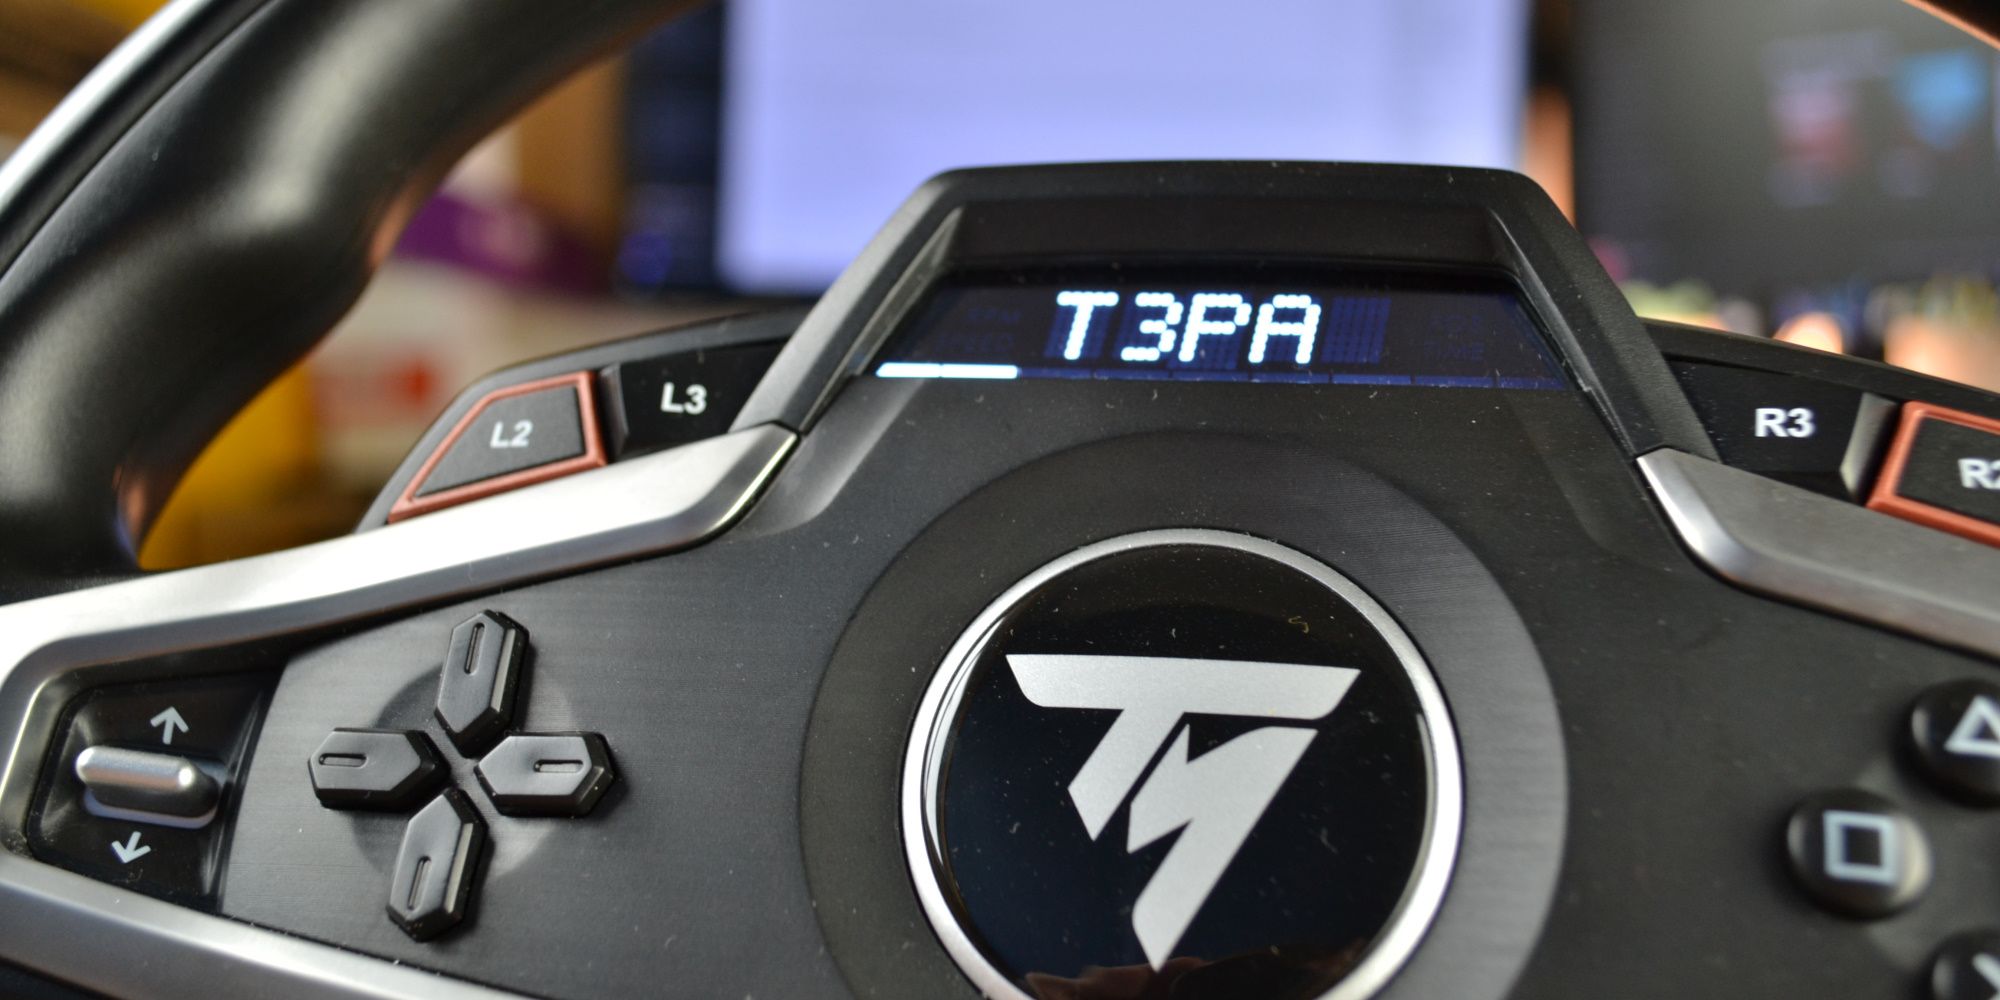 Thrustmaster T248 Review: New Hybrid Drive System Will Smash Your